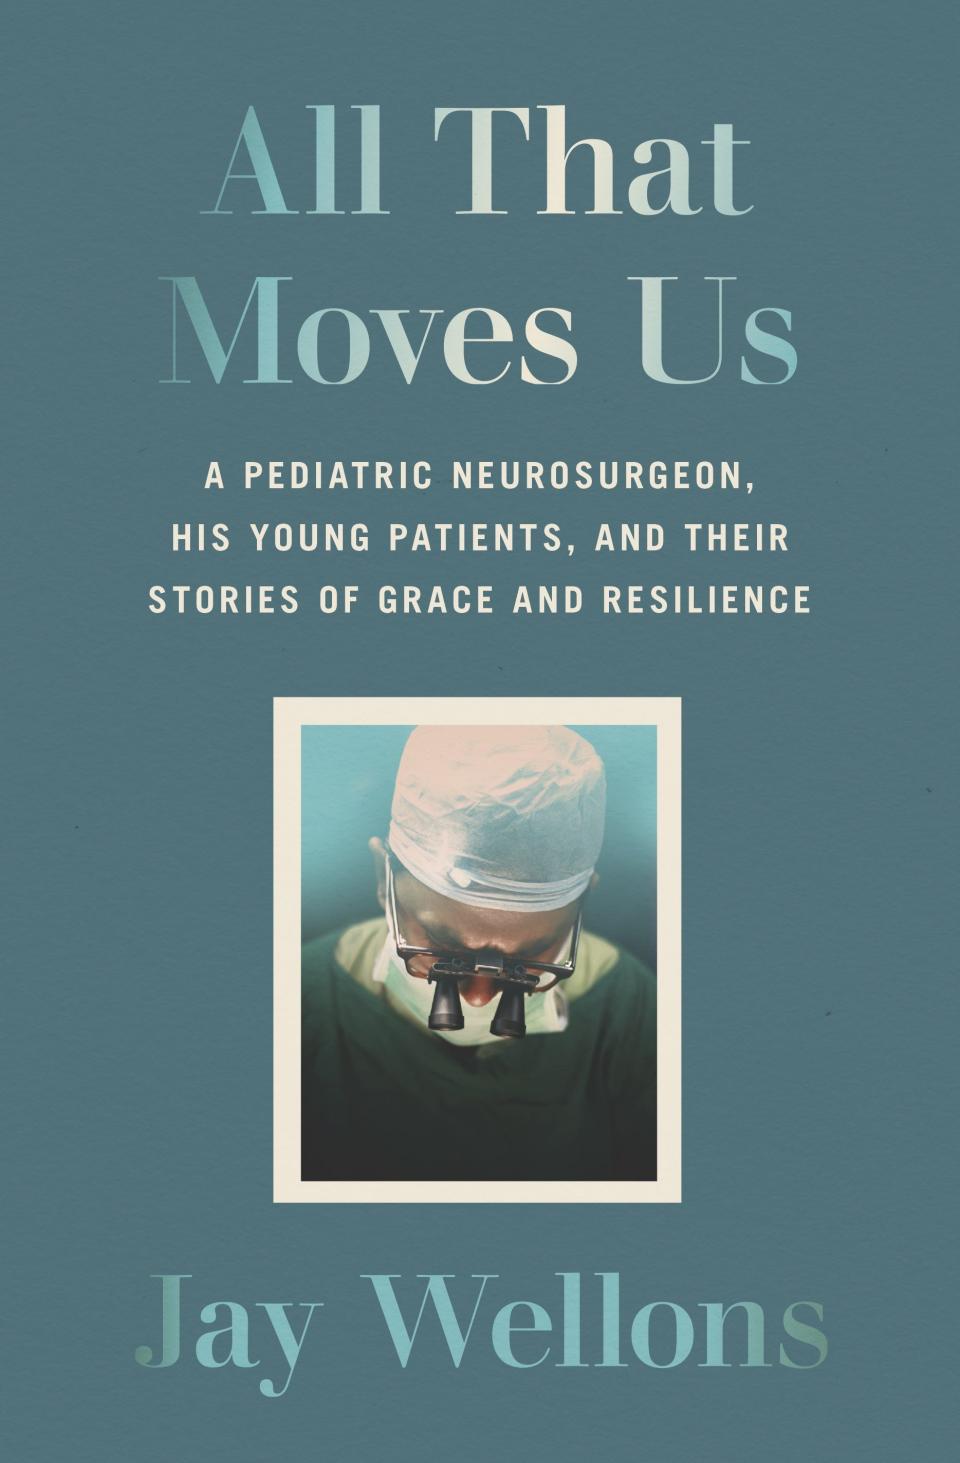 Jay Wellons' new book. "All That Moves Us," A pediatric neurosurgeon, his young patients and their stories of grace and resilience.